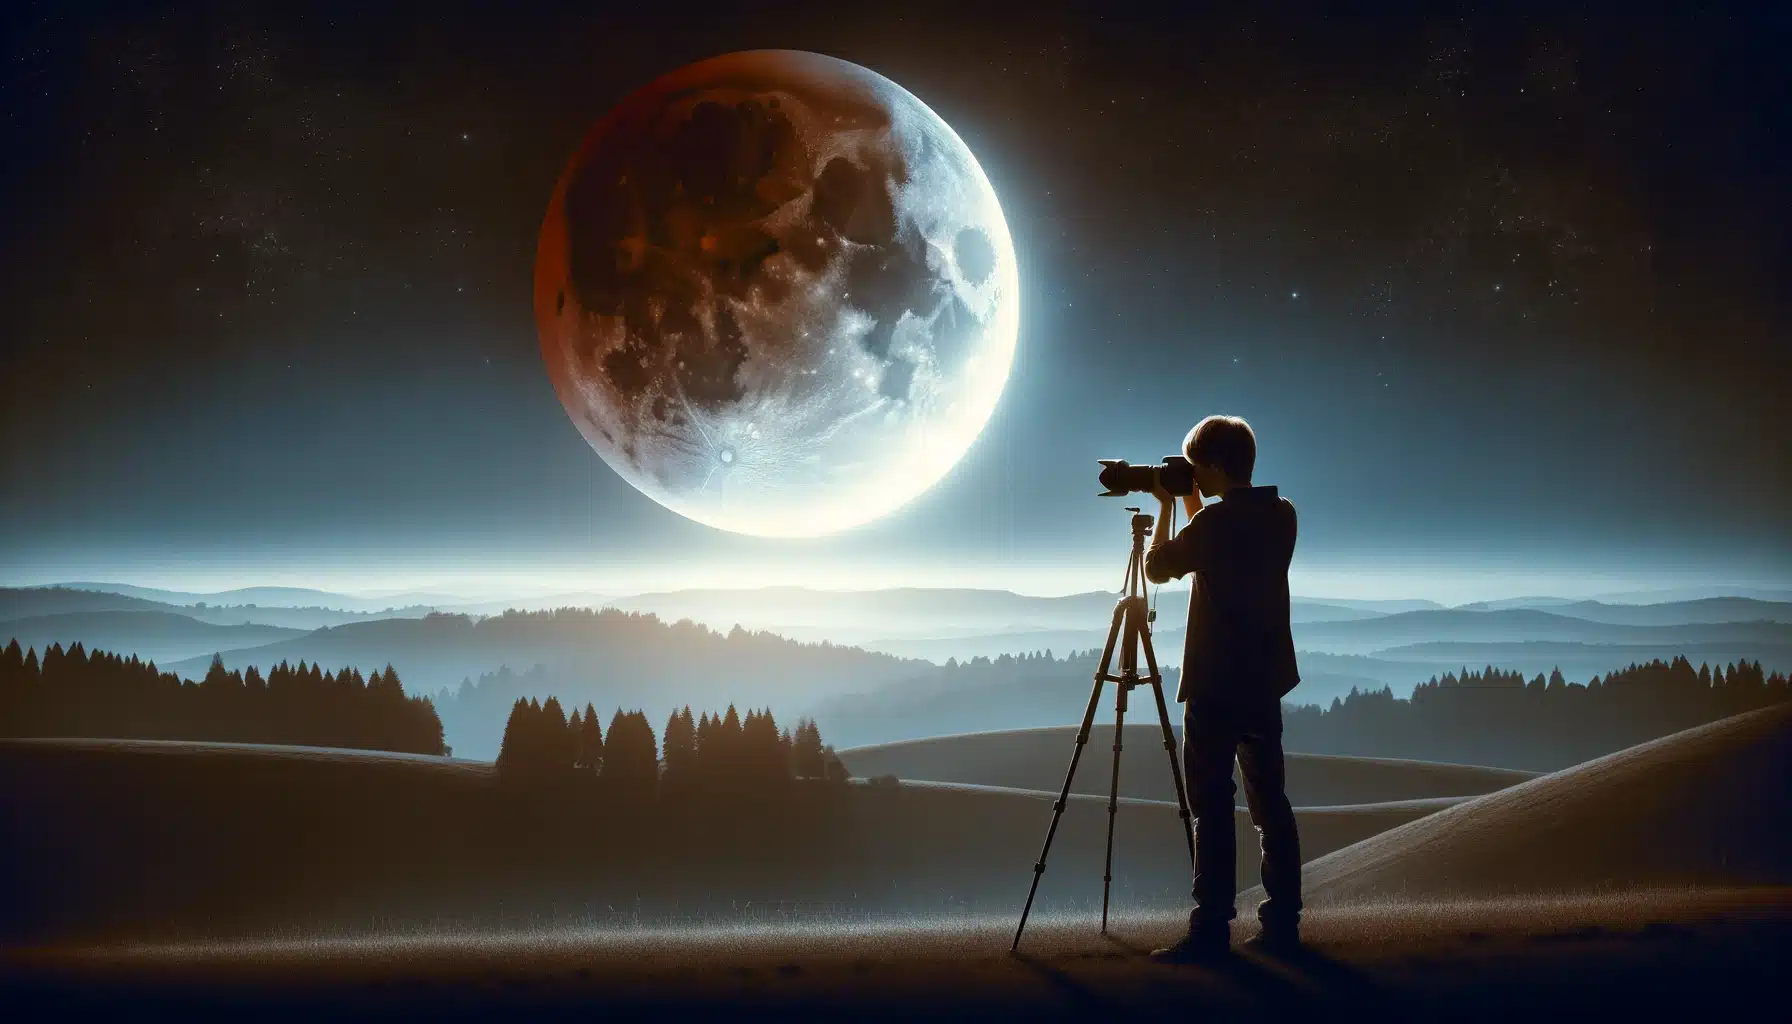 Photographer using both smartphone and DSLR on tripods to capture lunar eclipse.